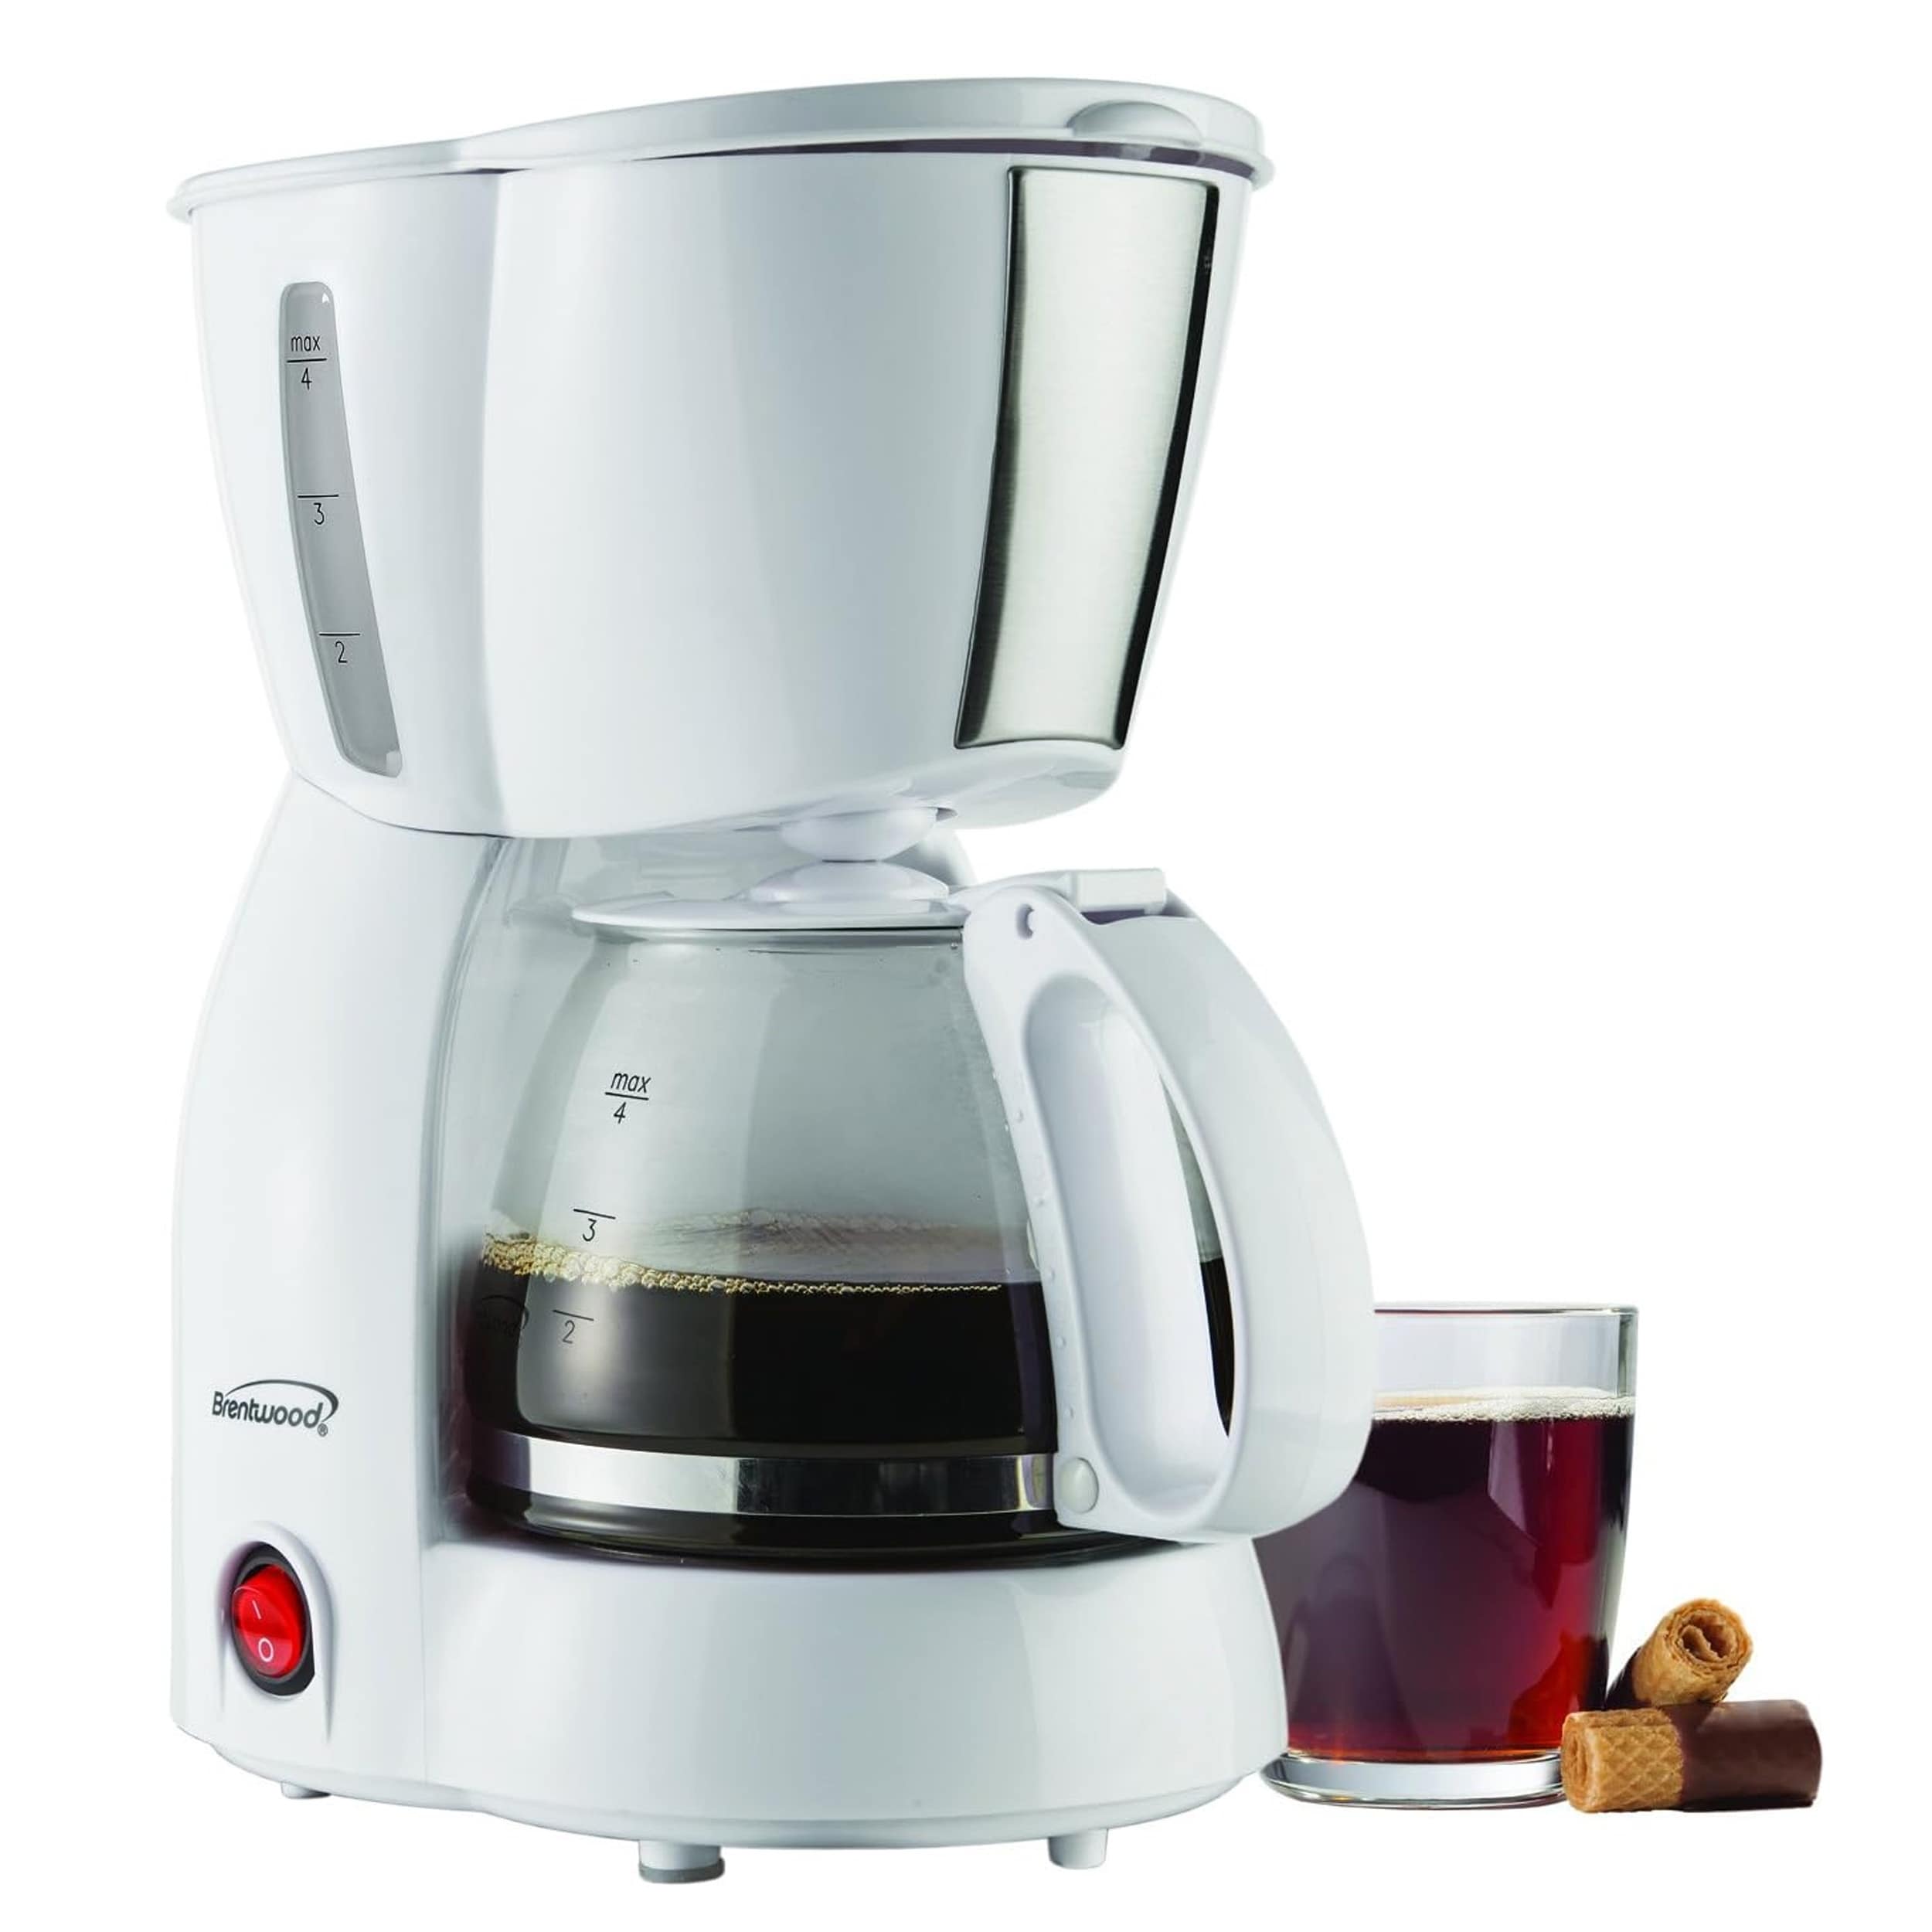 https://ak1.ostkcdn.com/images/products/is/images/direct/e7ab85a5928e85ea80bb16913e91d28143b44adf/4-Cup-Coffee-Maker-in-White.jpg